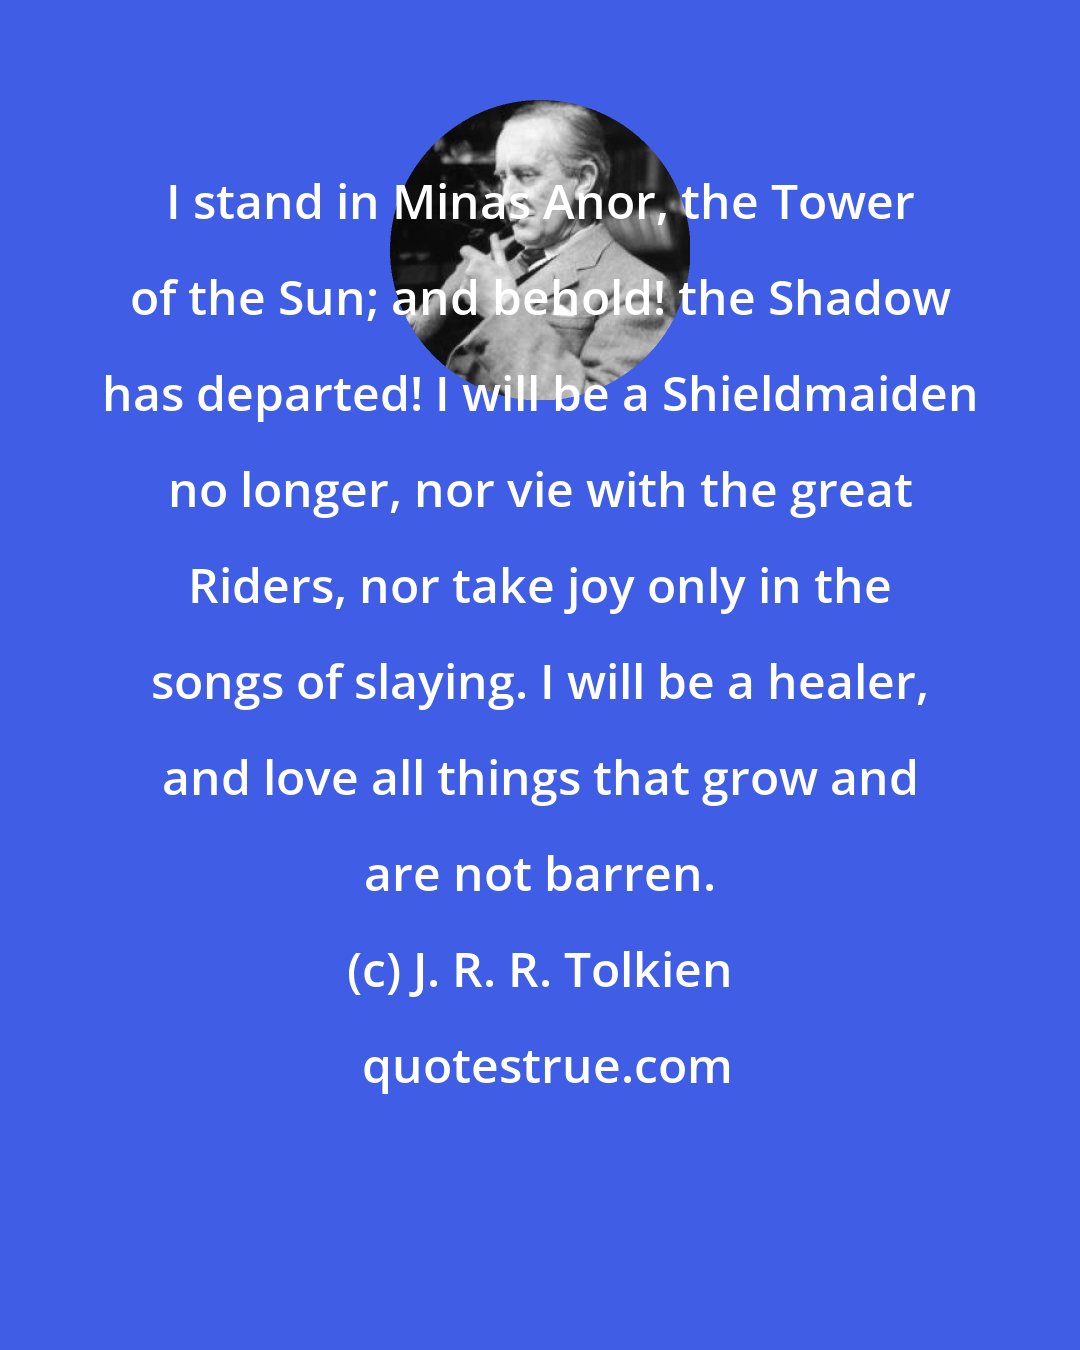 J. R. R. Tolkien: I stand in Minas Anor, the Tower of the Sun; and behold! the Shadow has departed! I will be a Shieldmaiden no longer, nor vie with the great Riders, nor take joy only in the songs of slaying. I will be a healer, and love all things that grow and are not barren.